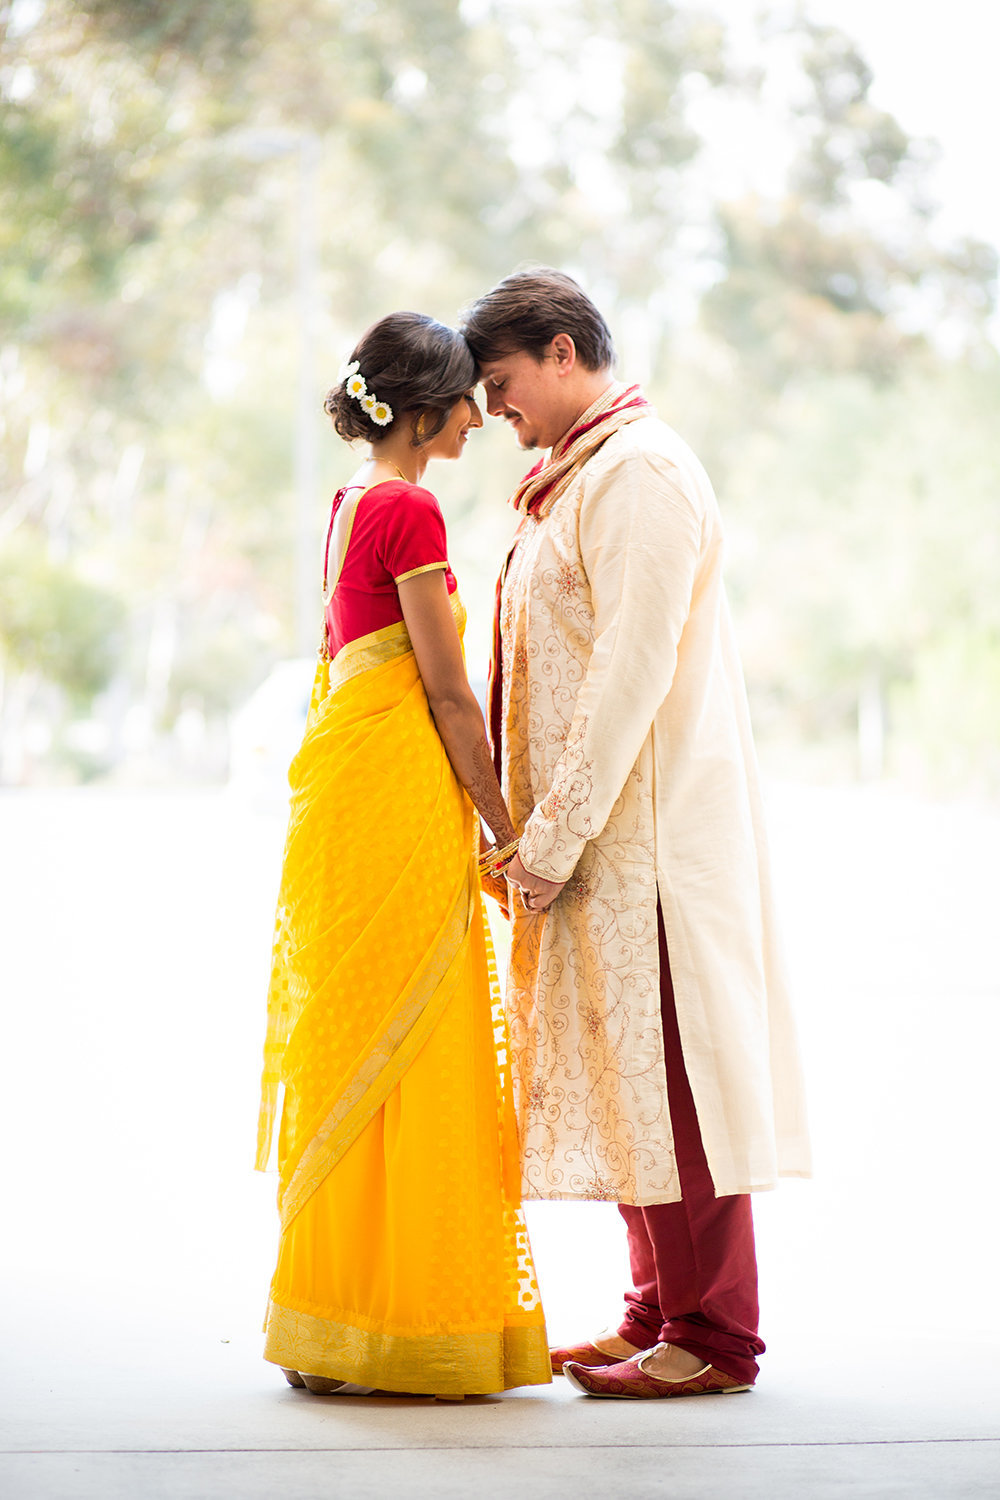 Bride and Groom in Sari and Sherwani | Romantic Moment Captured in a Portrait